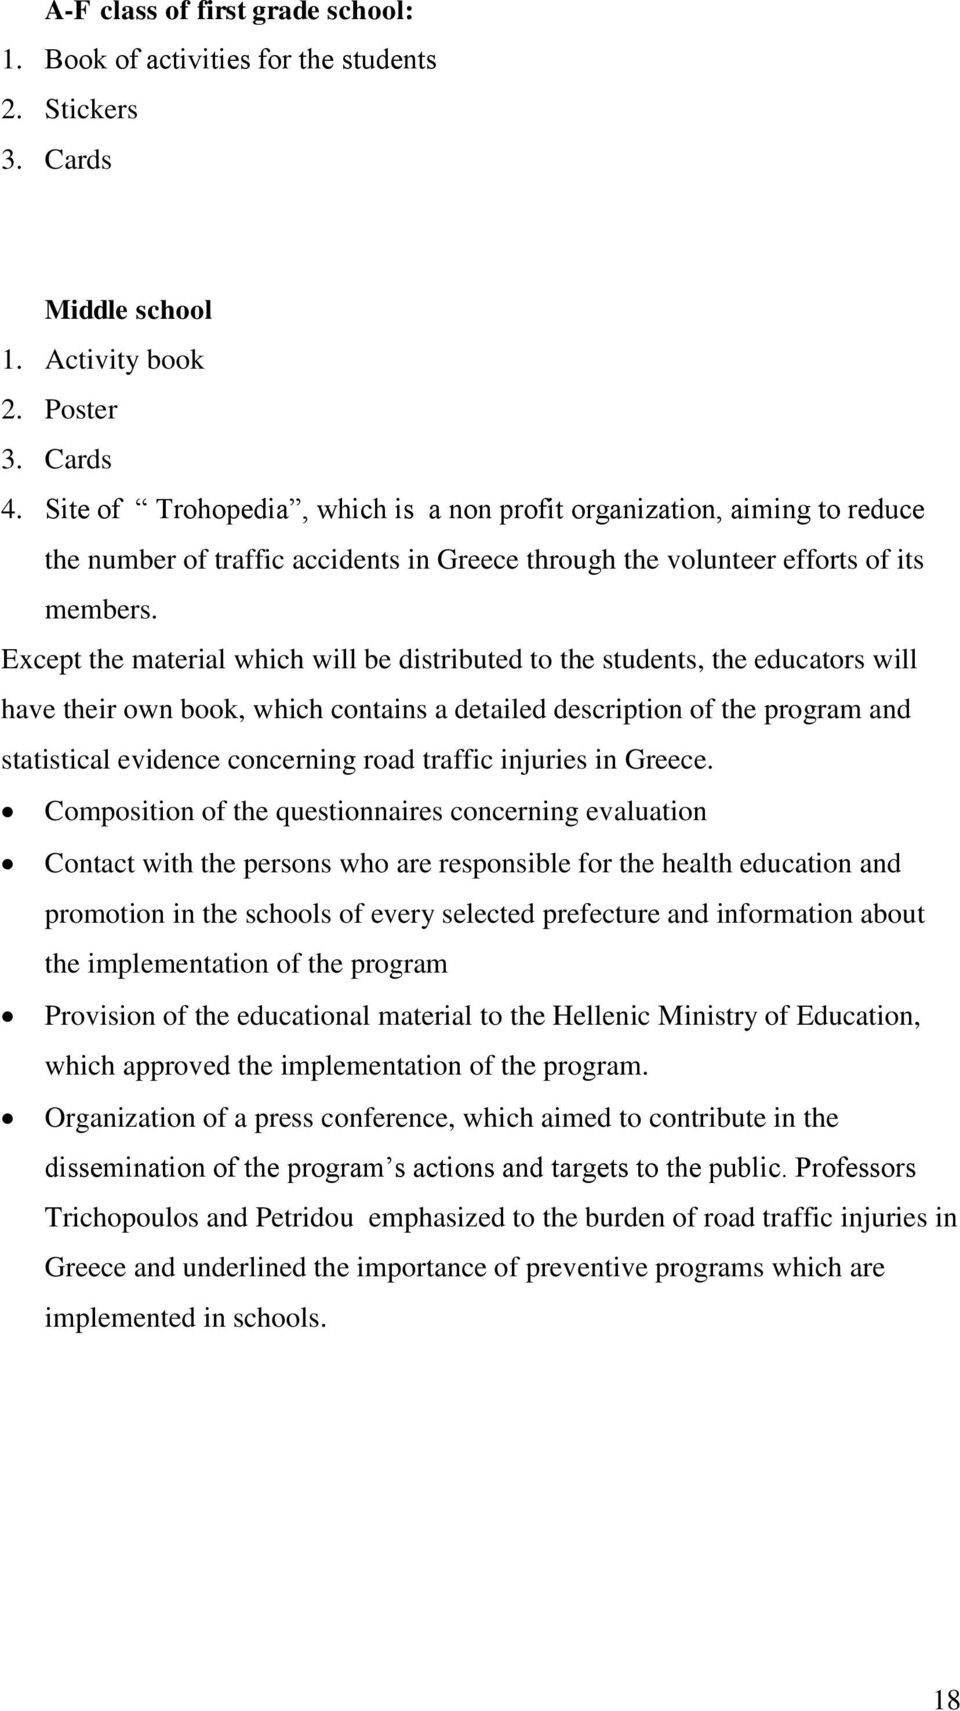 Except the material which will be distributed to the students, the educators will have their own book, which contains a detailed description of the program and statistical evidence concerning road